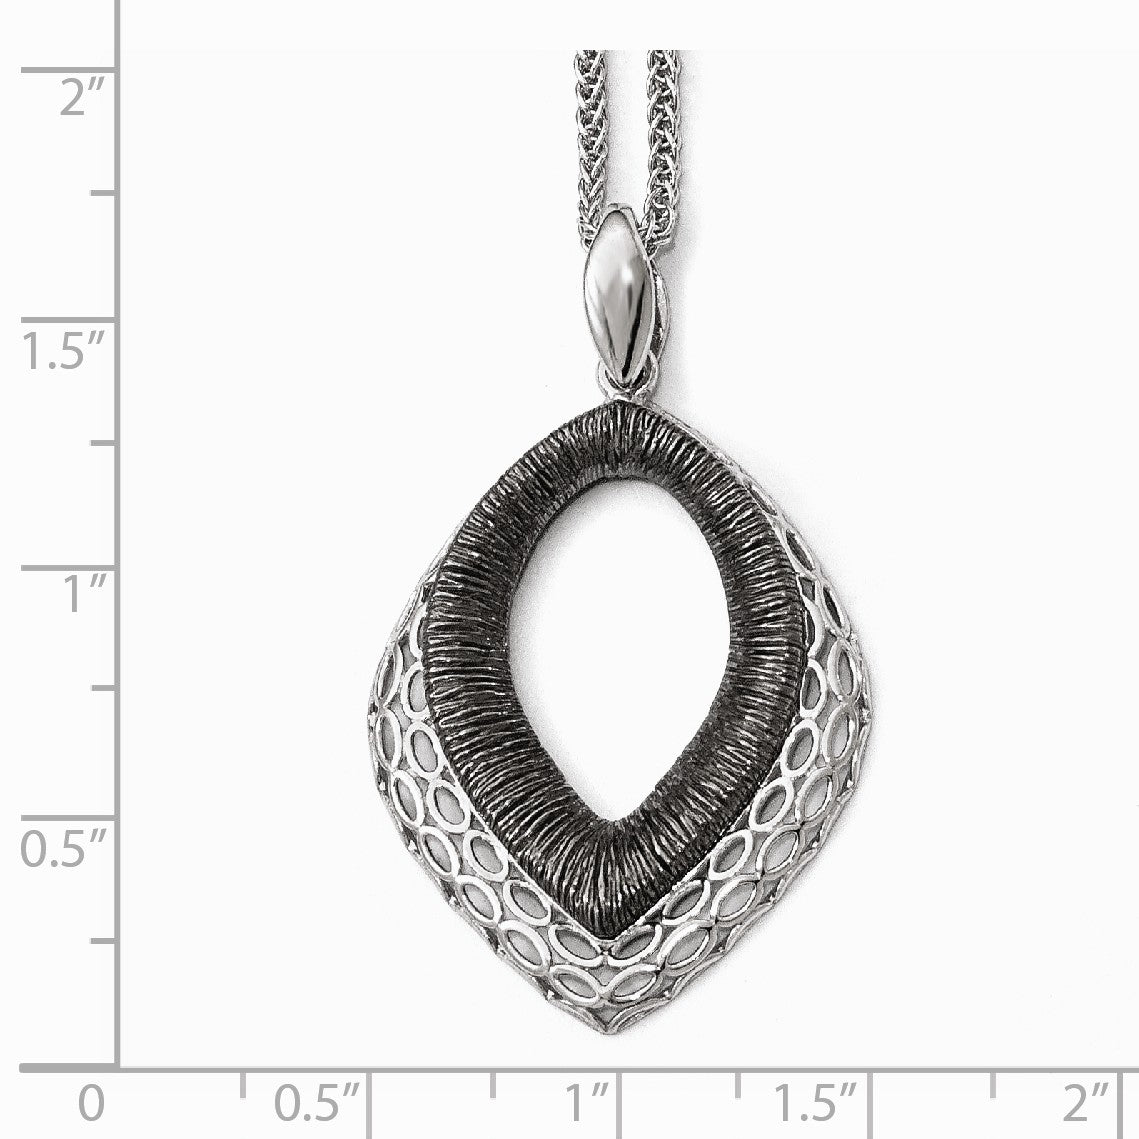 Alternate view of the Sterling Silver &amp; Black Plated Polished Textured Pendant, 25 x 40mm by The Black Bow Jewelry Co.